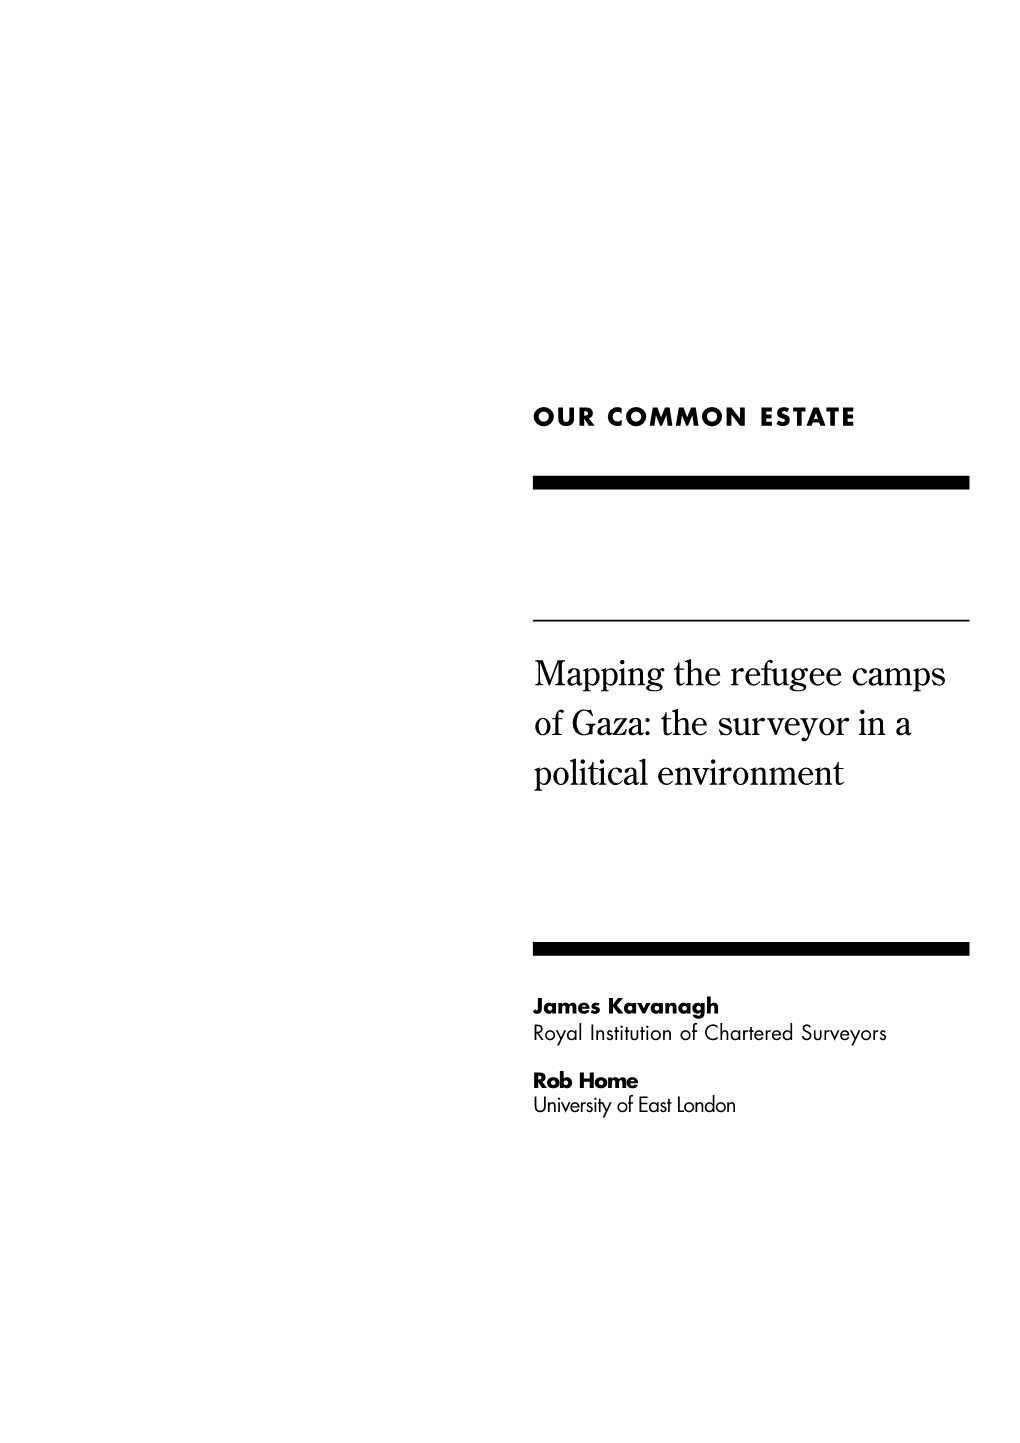 Mapping the Refugee Camps of Gaza: the Surveyor in a Political Environ M E N T